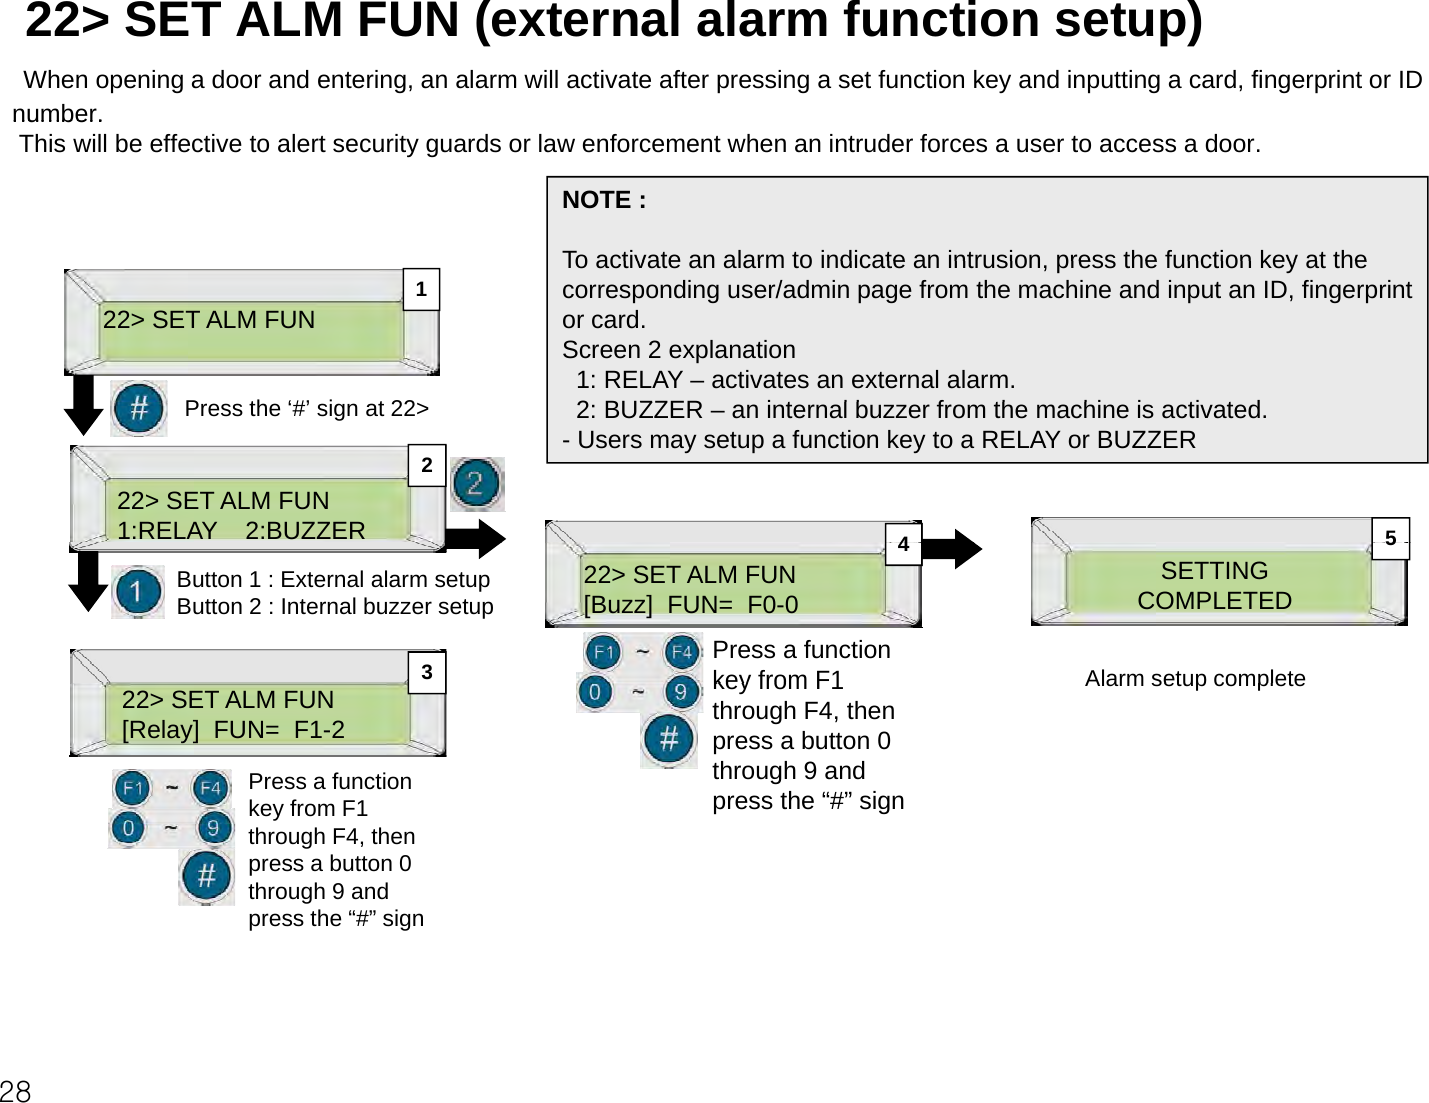 22&gt; SET ALM FUN (external alarm function setup)When opening a door and entering, an alarm will activate after pressing a set function key and inputting a card, fingerprint or ID number.number.This will be effective to alert security guards or law enforcement when an intruder forces a user to access a door. NOTE :To activate an alarm to indicate an intrusion press the function key at the22&gt; SET ALM FUNP th ‘#’ i t 22To activate an alarm to indicate an intrusion, press the function key at the corresponding user/admin page from the machine and input an ID, fingerprint or card. Screen 2 explanation1: RELAY – activates an external alarm.2 BUZZERit lb f th hi i ti td122&gt; SET ALM FUN1:RELAY    2:BUZZER244Press the ‘#’ sign at 22&gt;2: BUZZER –an internal buzzer from the machine is activated.- Users may setup a function key to a RELAY or BUZZER53422&gt; SET ALM FUN[Buzz]  FUN=  F0-04Button 1 : External alarm setupButton 2 : Internal buzzer setupAlarm setup completePress a function key from F1SETTINGCOMPLETED522&gt; SET ALM FUN[Relay]  FUN=  F1-2Alarm setup completePress a function key from F1 key from F1 through F4, then press a button 0 through 9 and press the “#” signthrough F4, then press a button 0 through 9 and press the “#” sign28